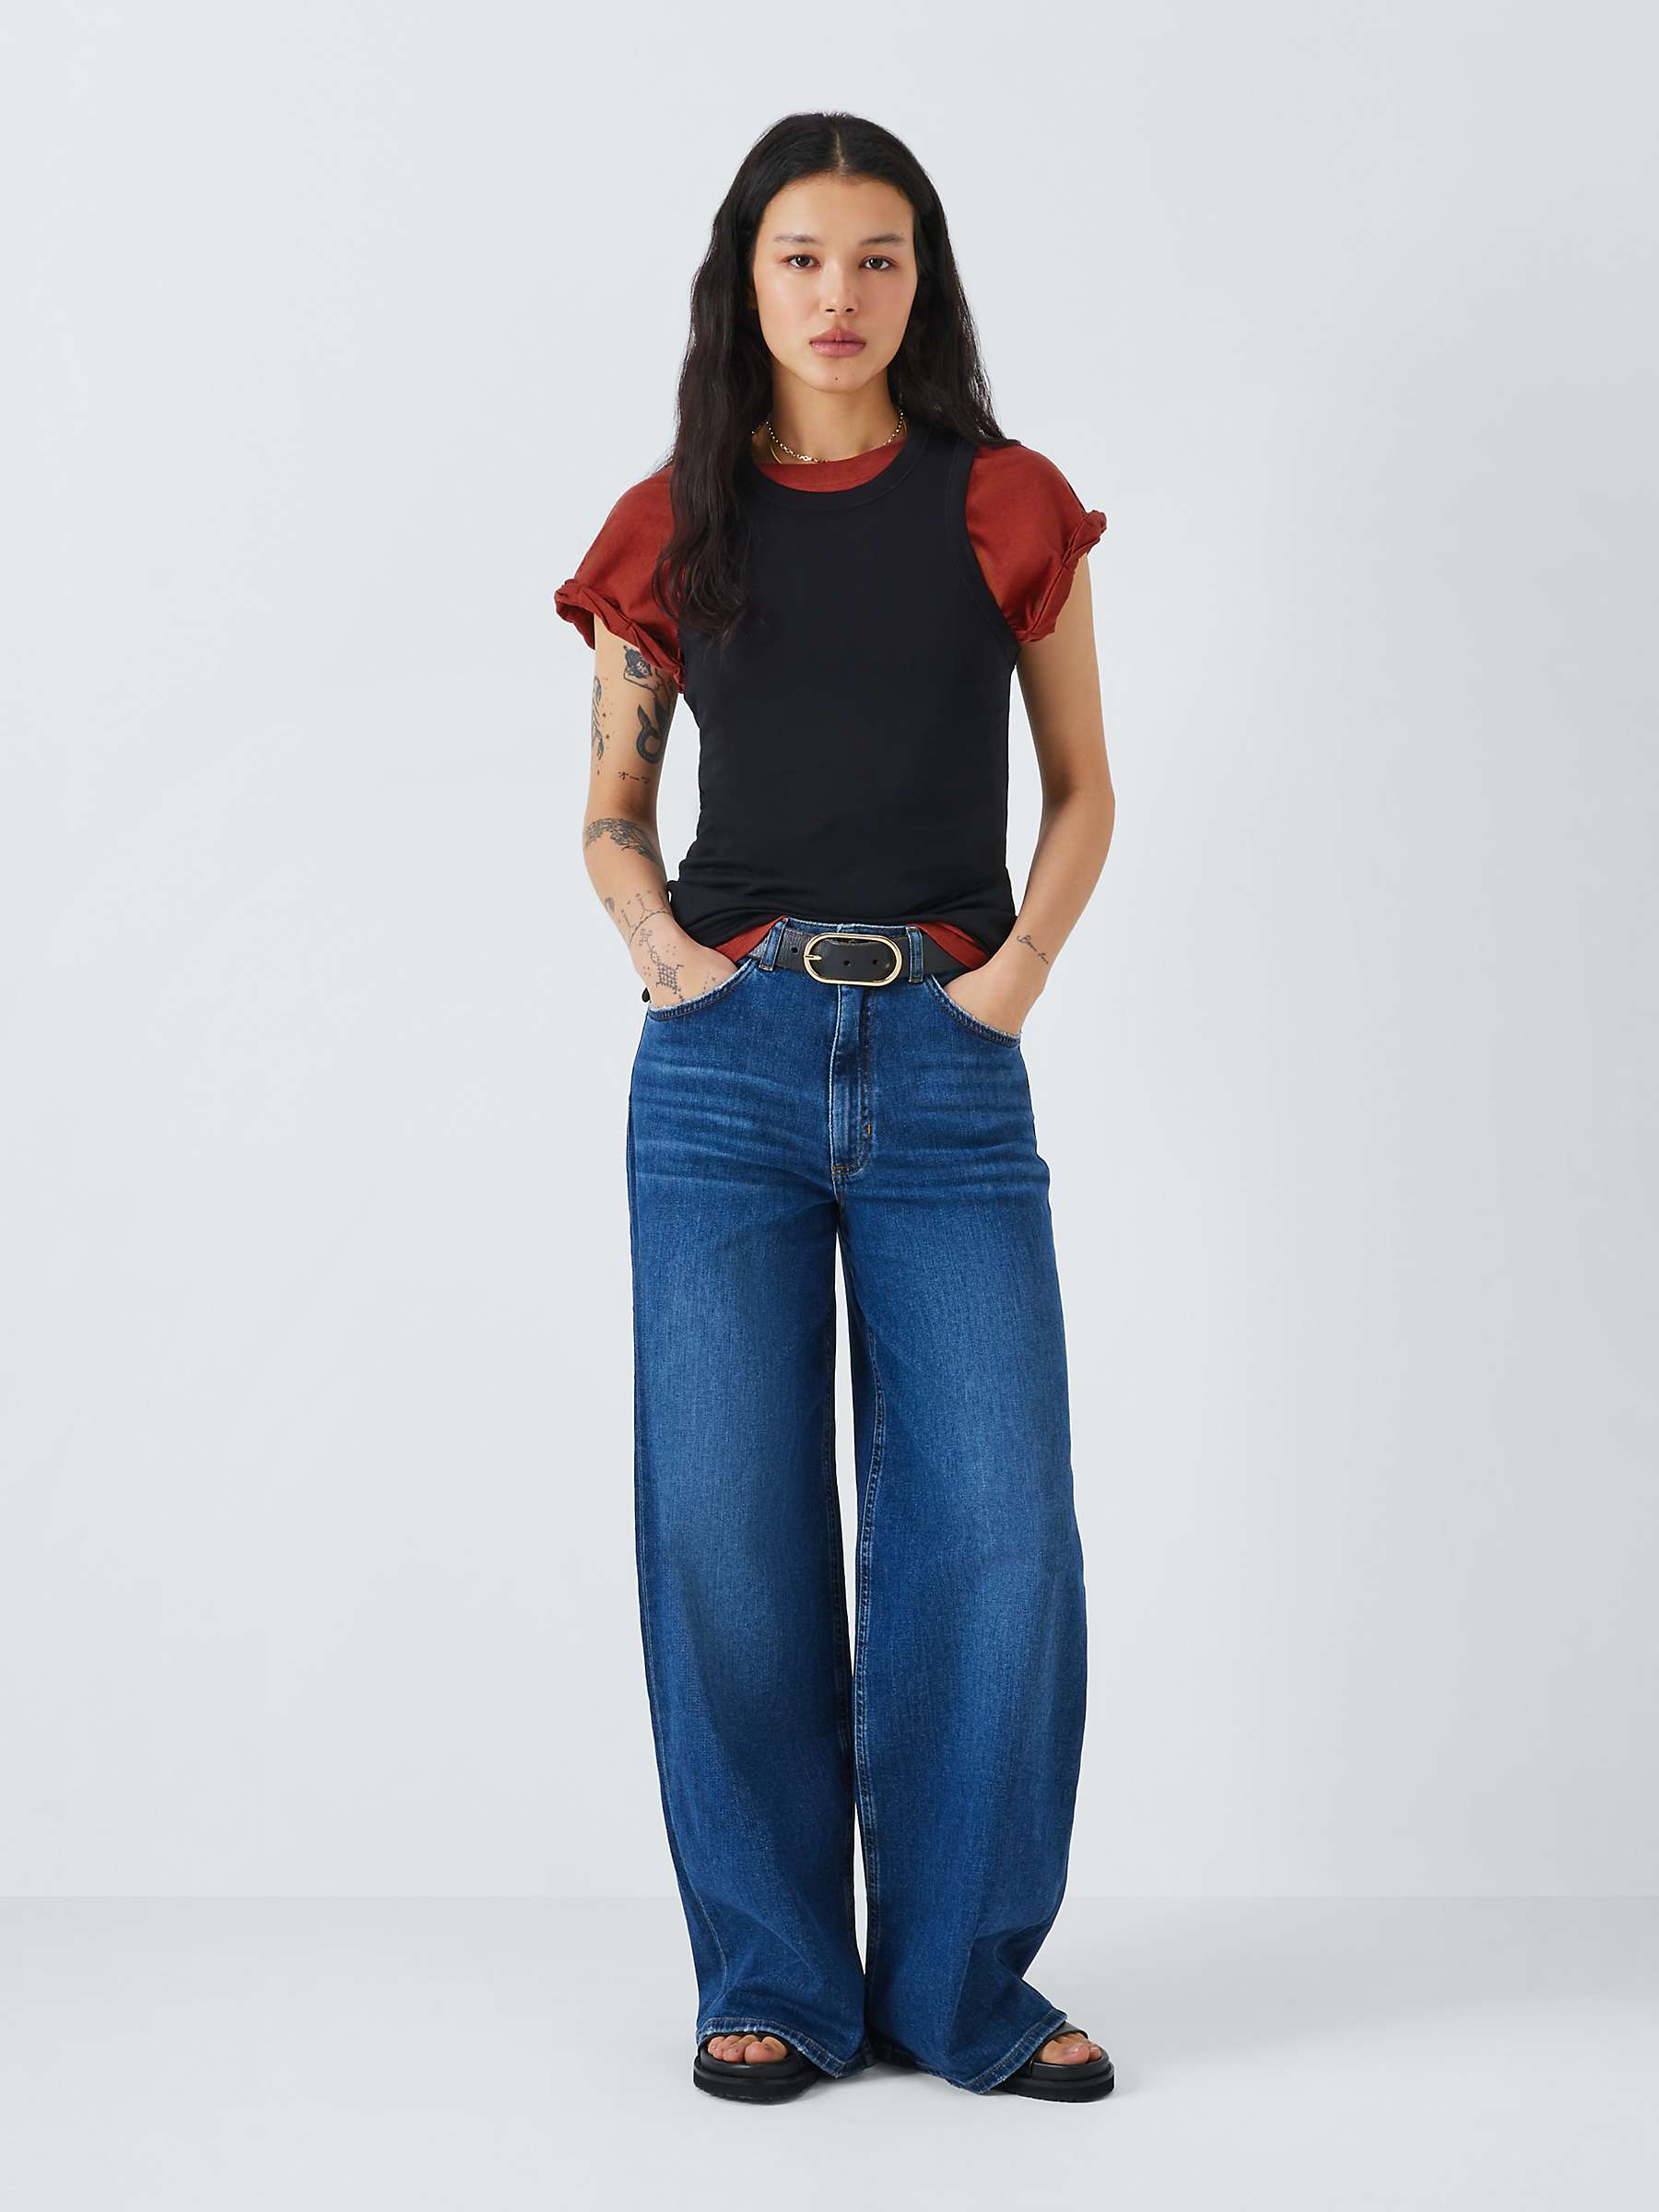 Buy AND/OR Hadley Twist Tank T-Shirt Online at johnlewis.com